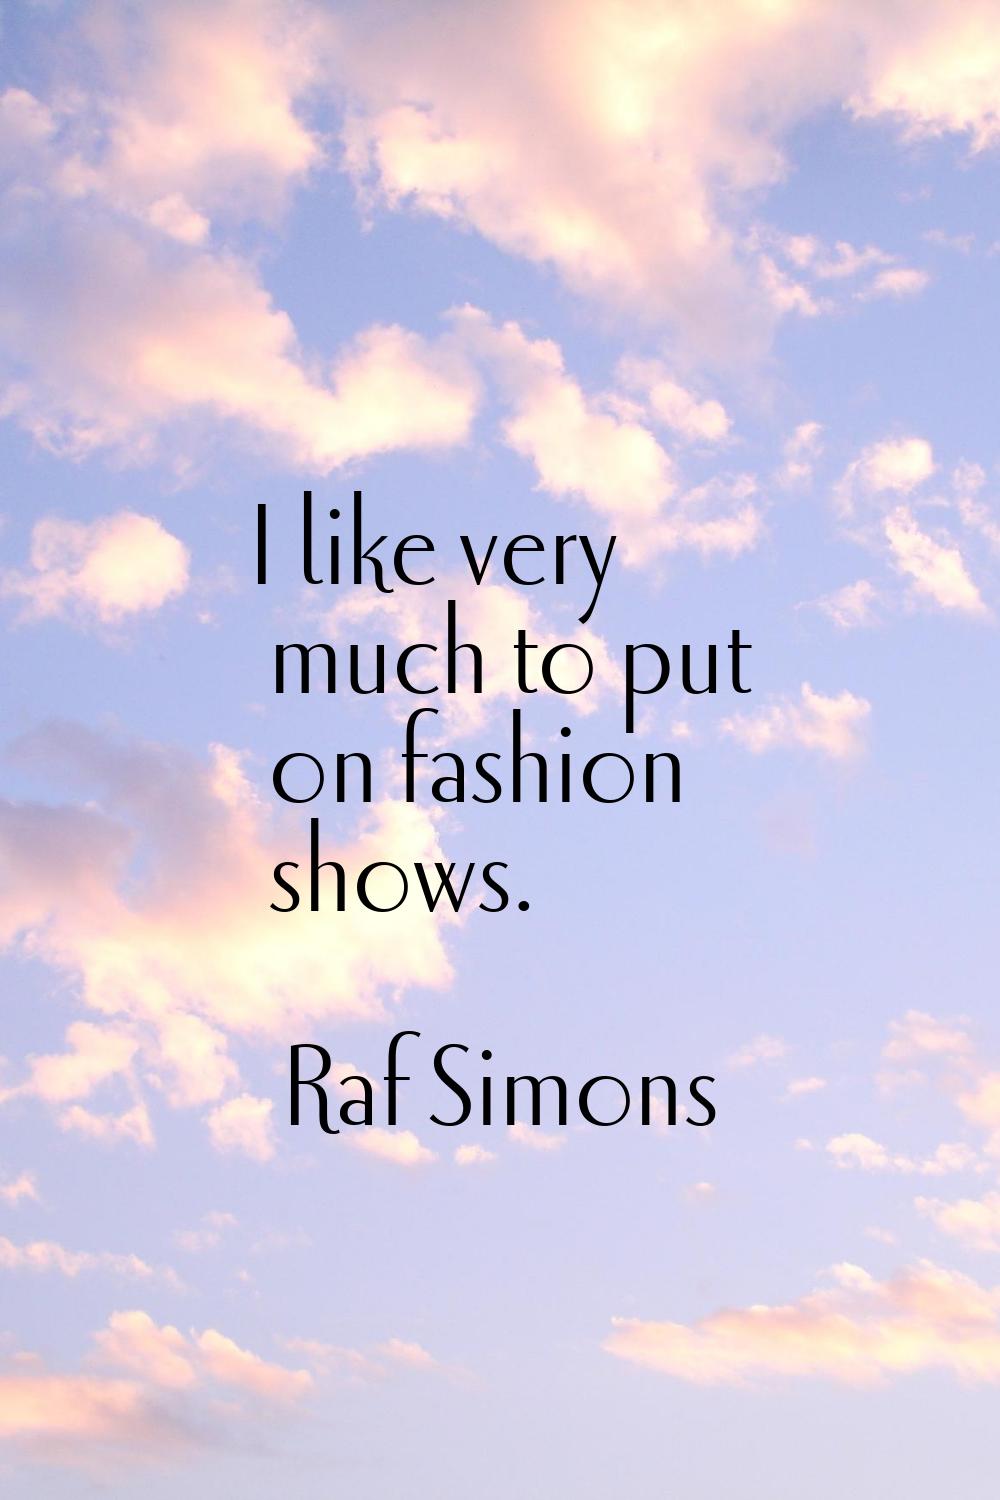 I like very much to put on fashion shows.